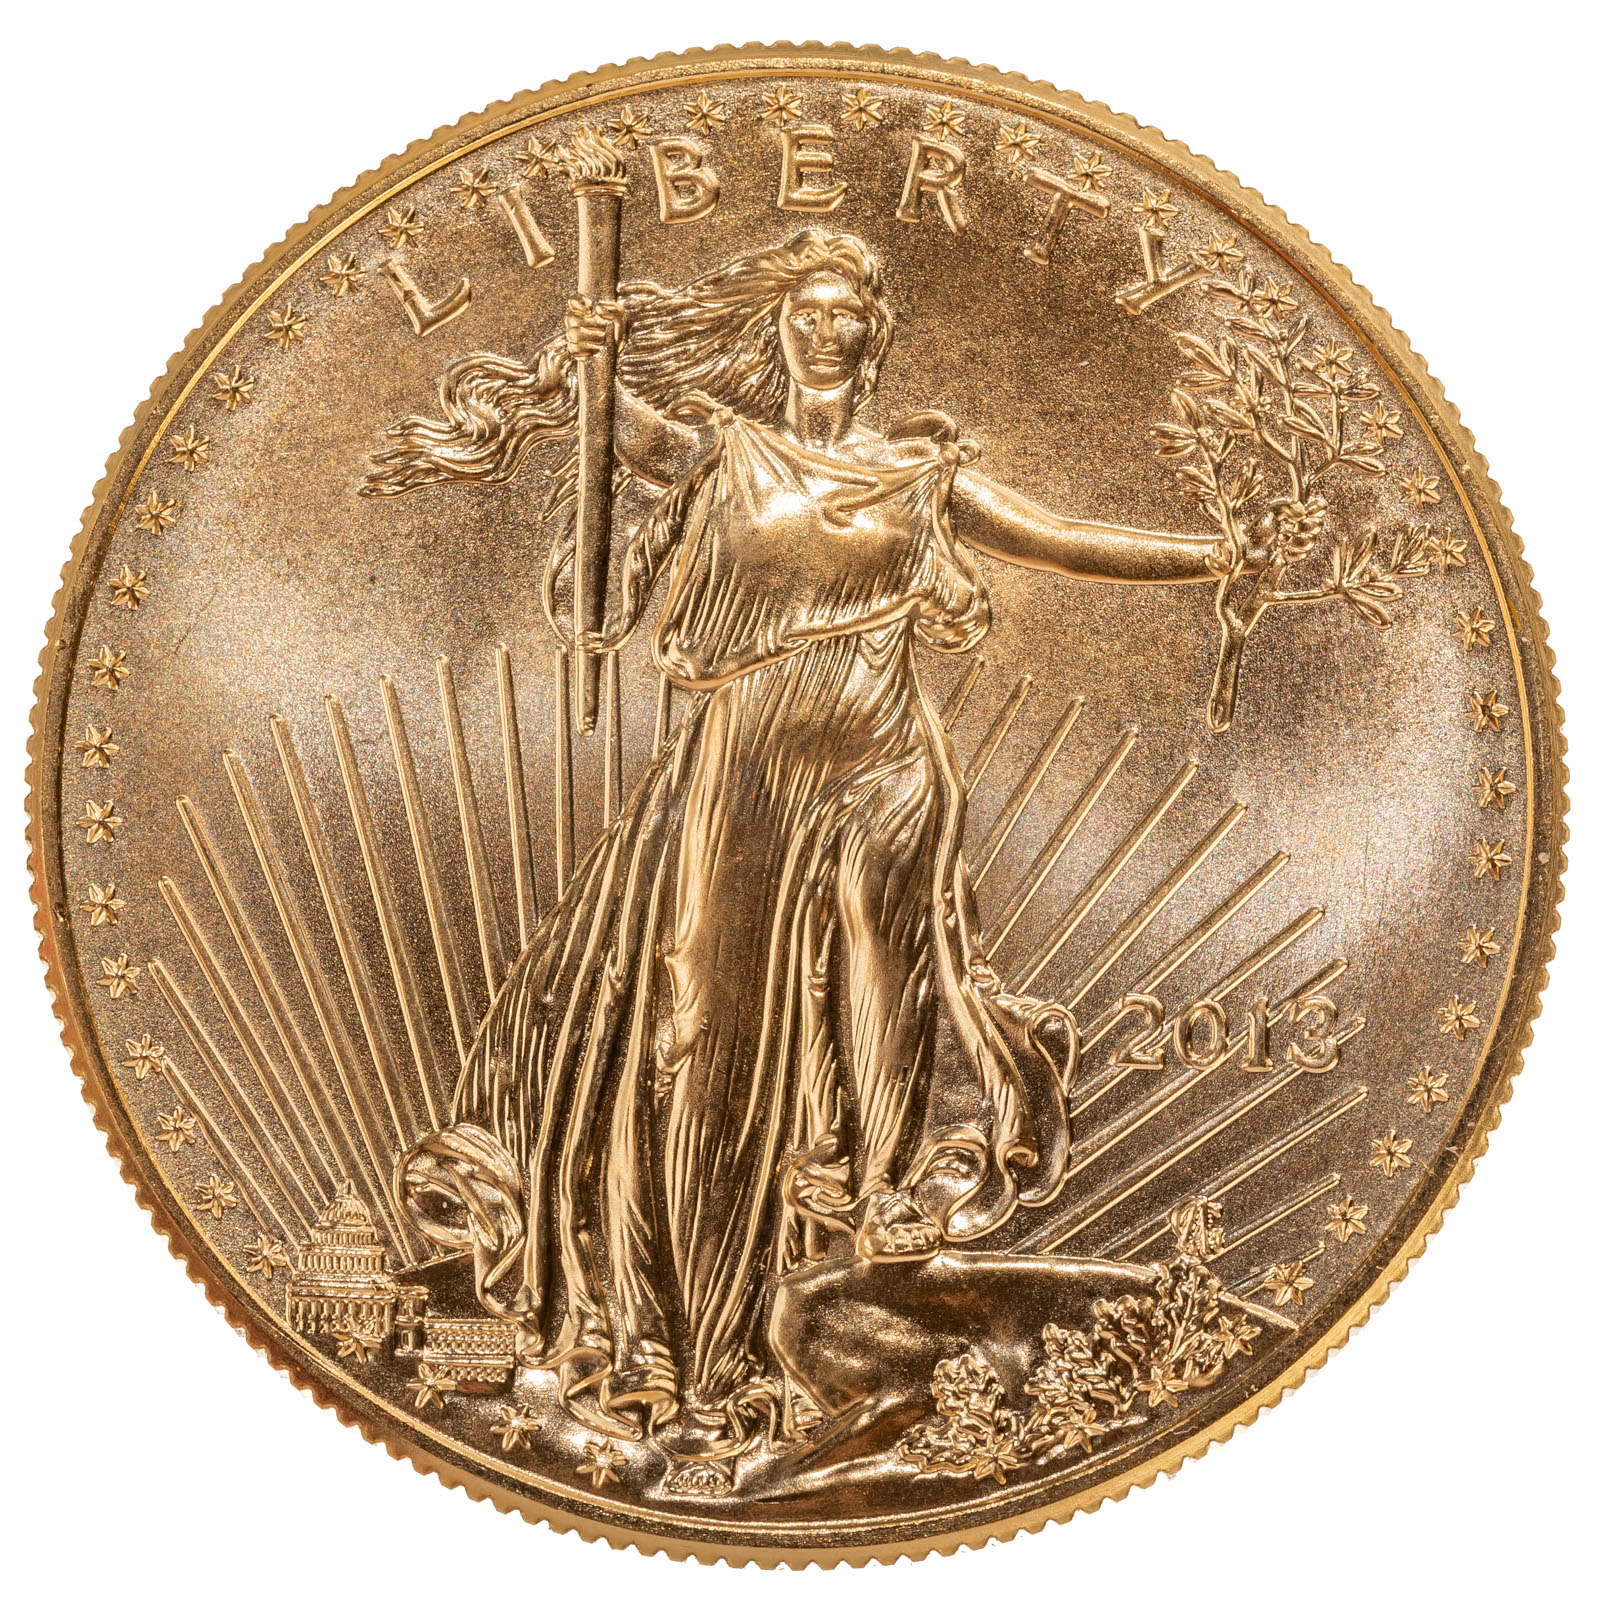 2013 $50 1 OUNCE GOLD AMERICAN